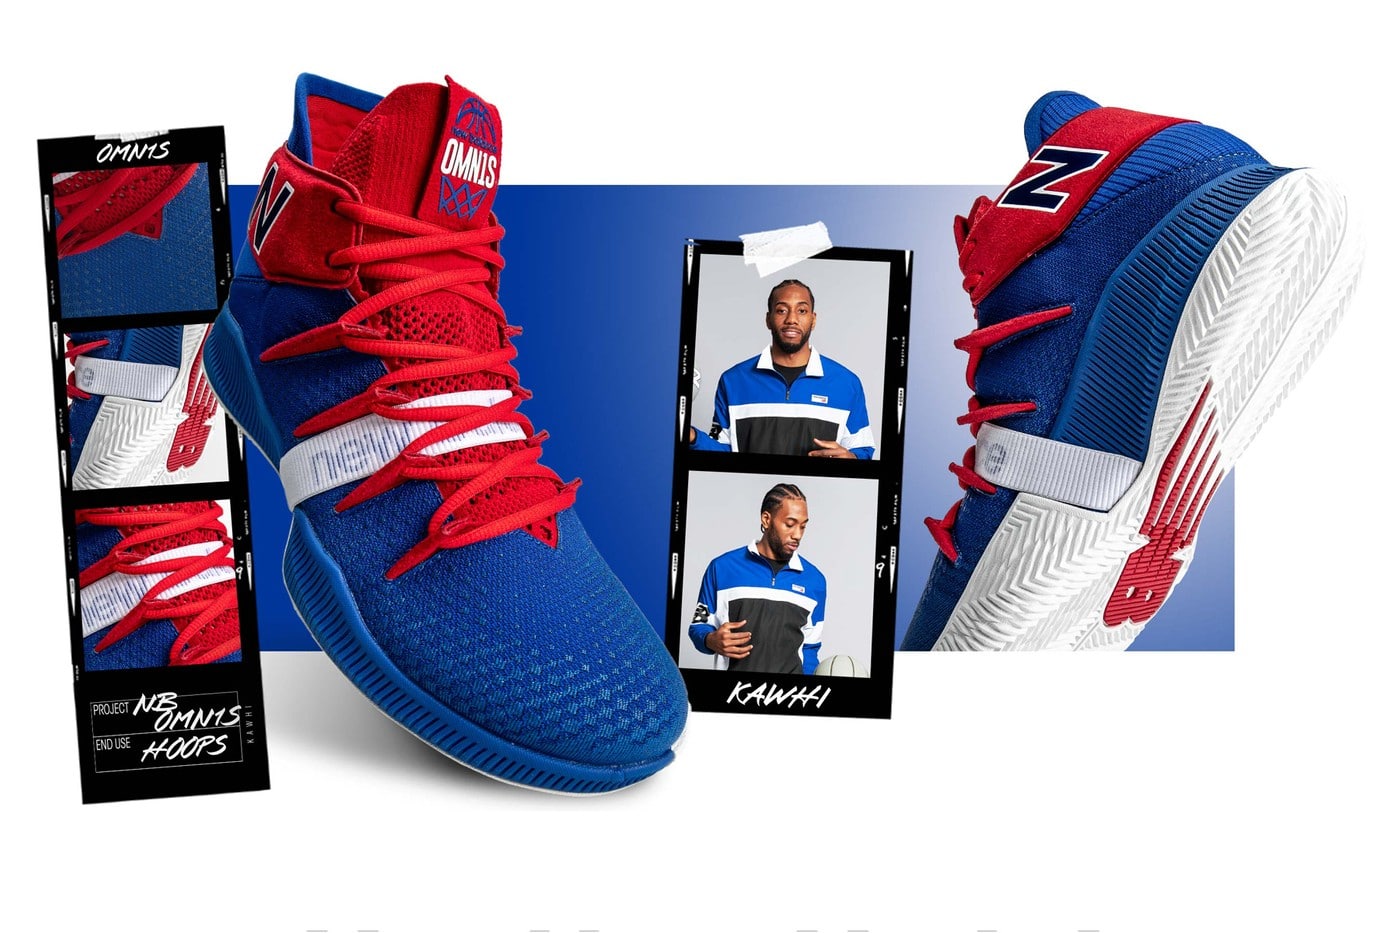 New Balance Unveils Kawhi Leonard’s OMN1S in Clippers Colors